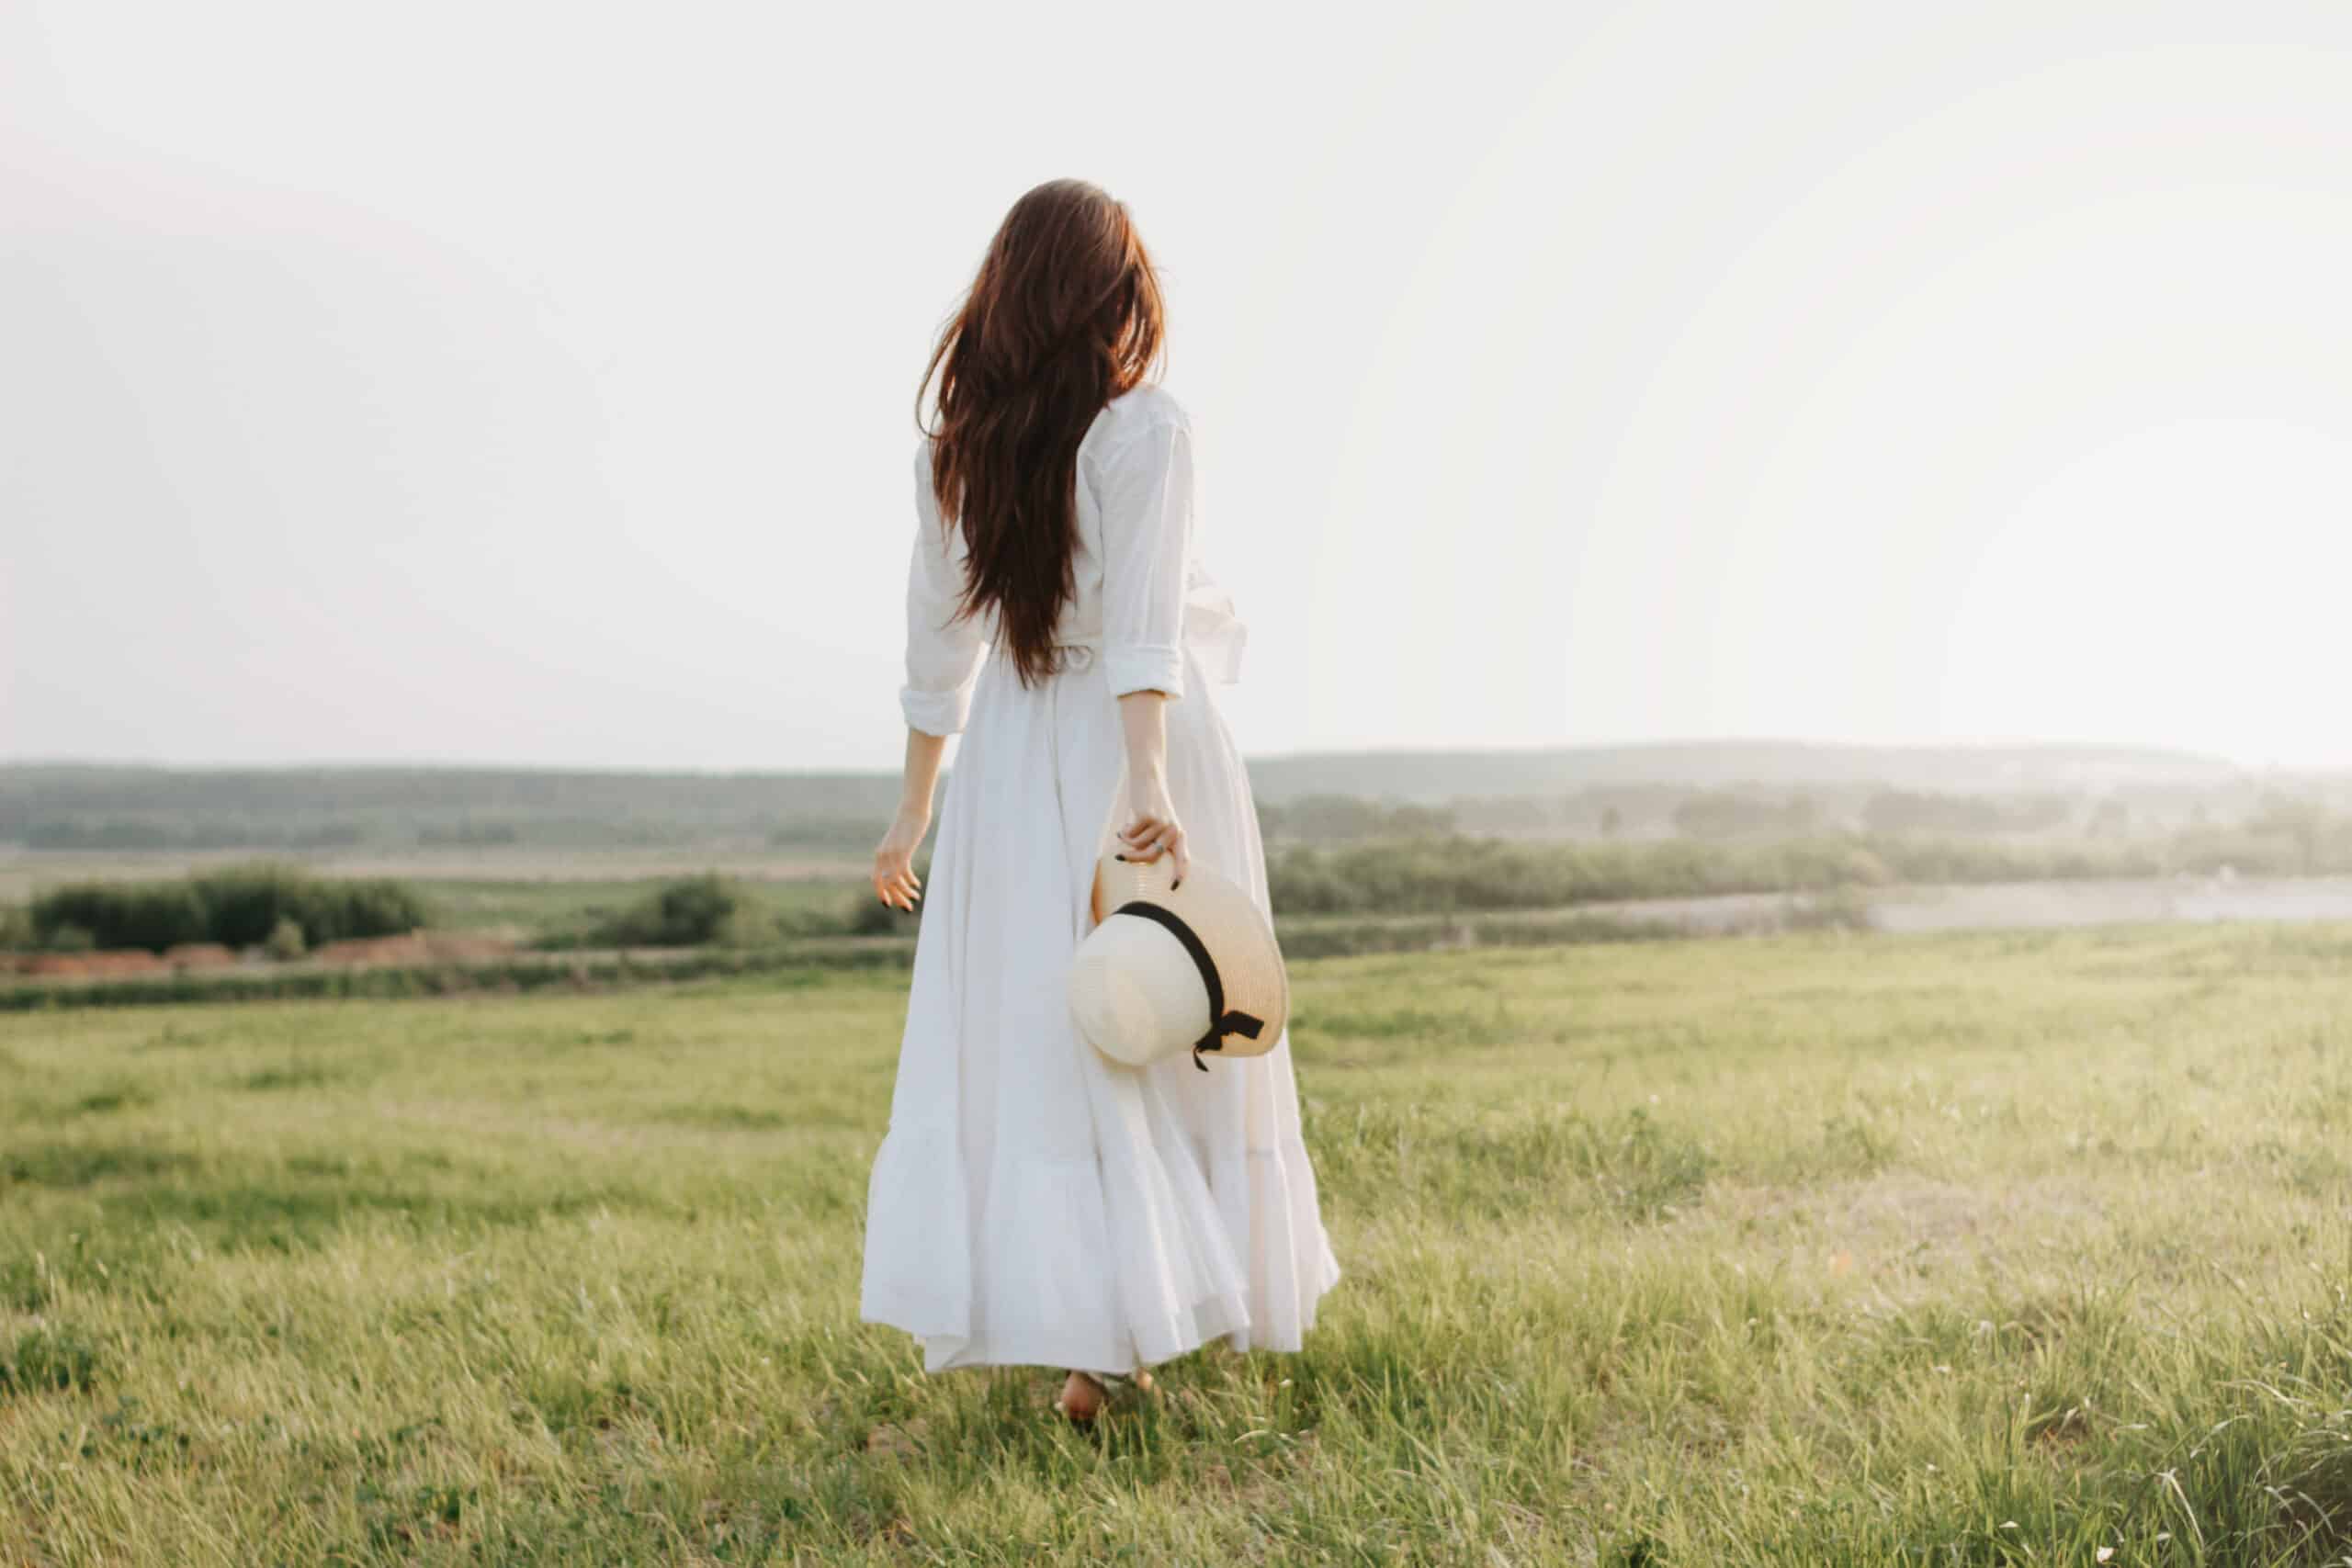 Beautiful carefree long haired woman in white dress and straw hat enjoys life in nature field looking towards the sunset.